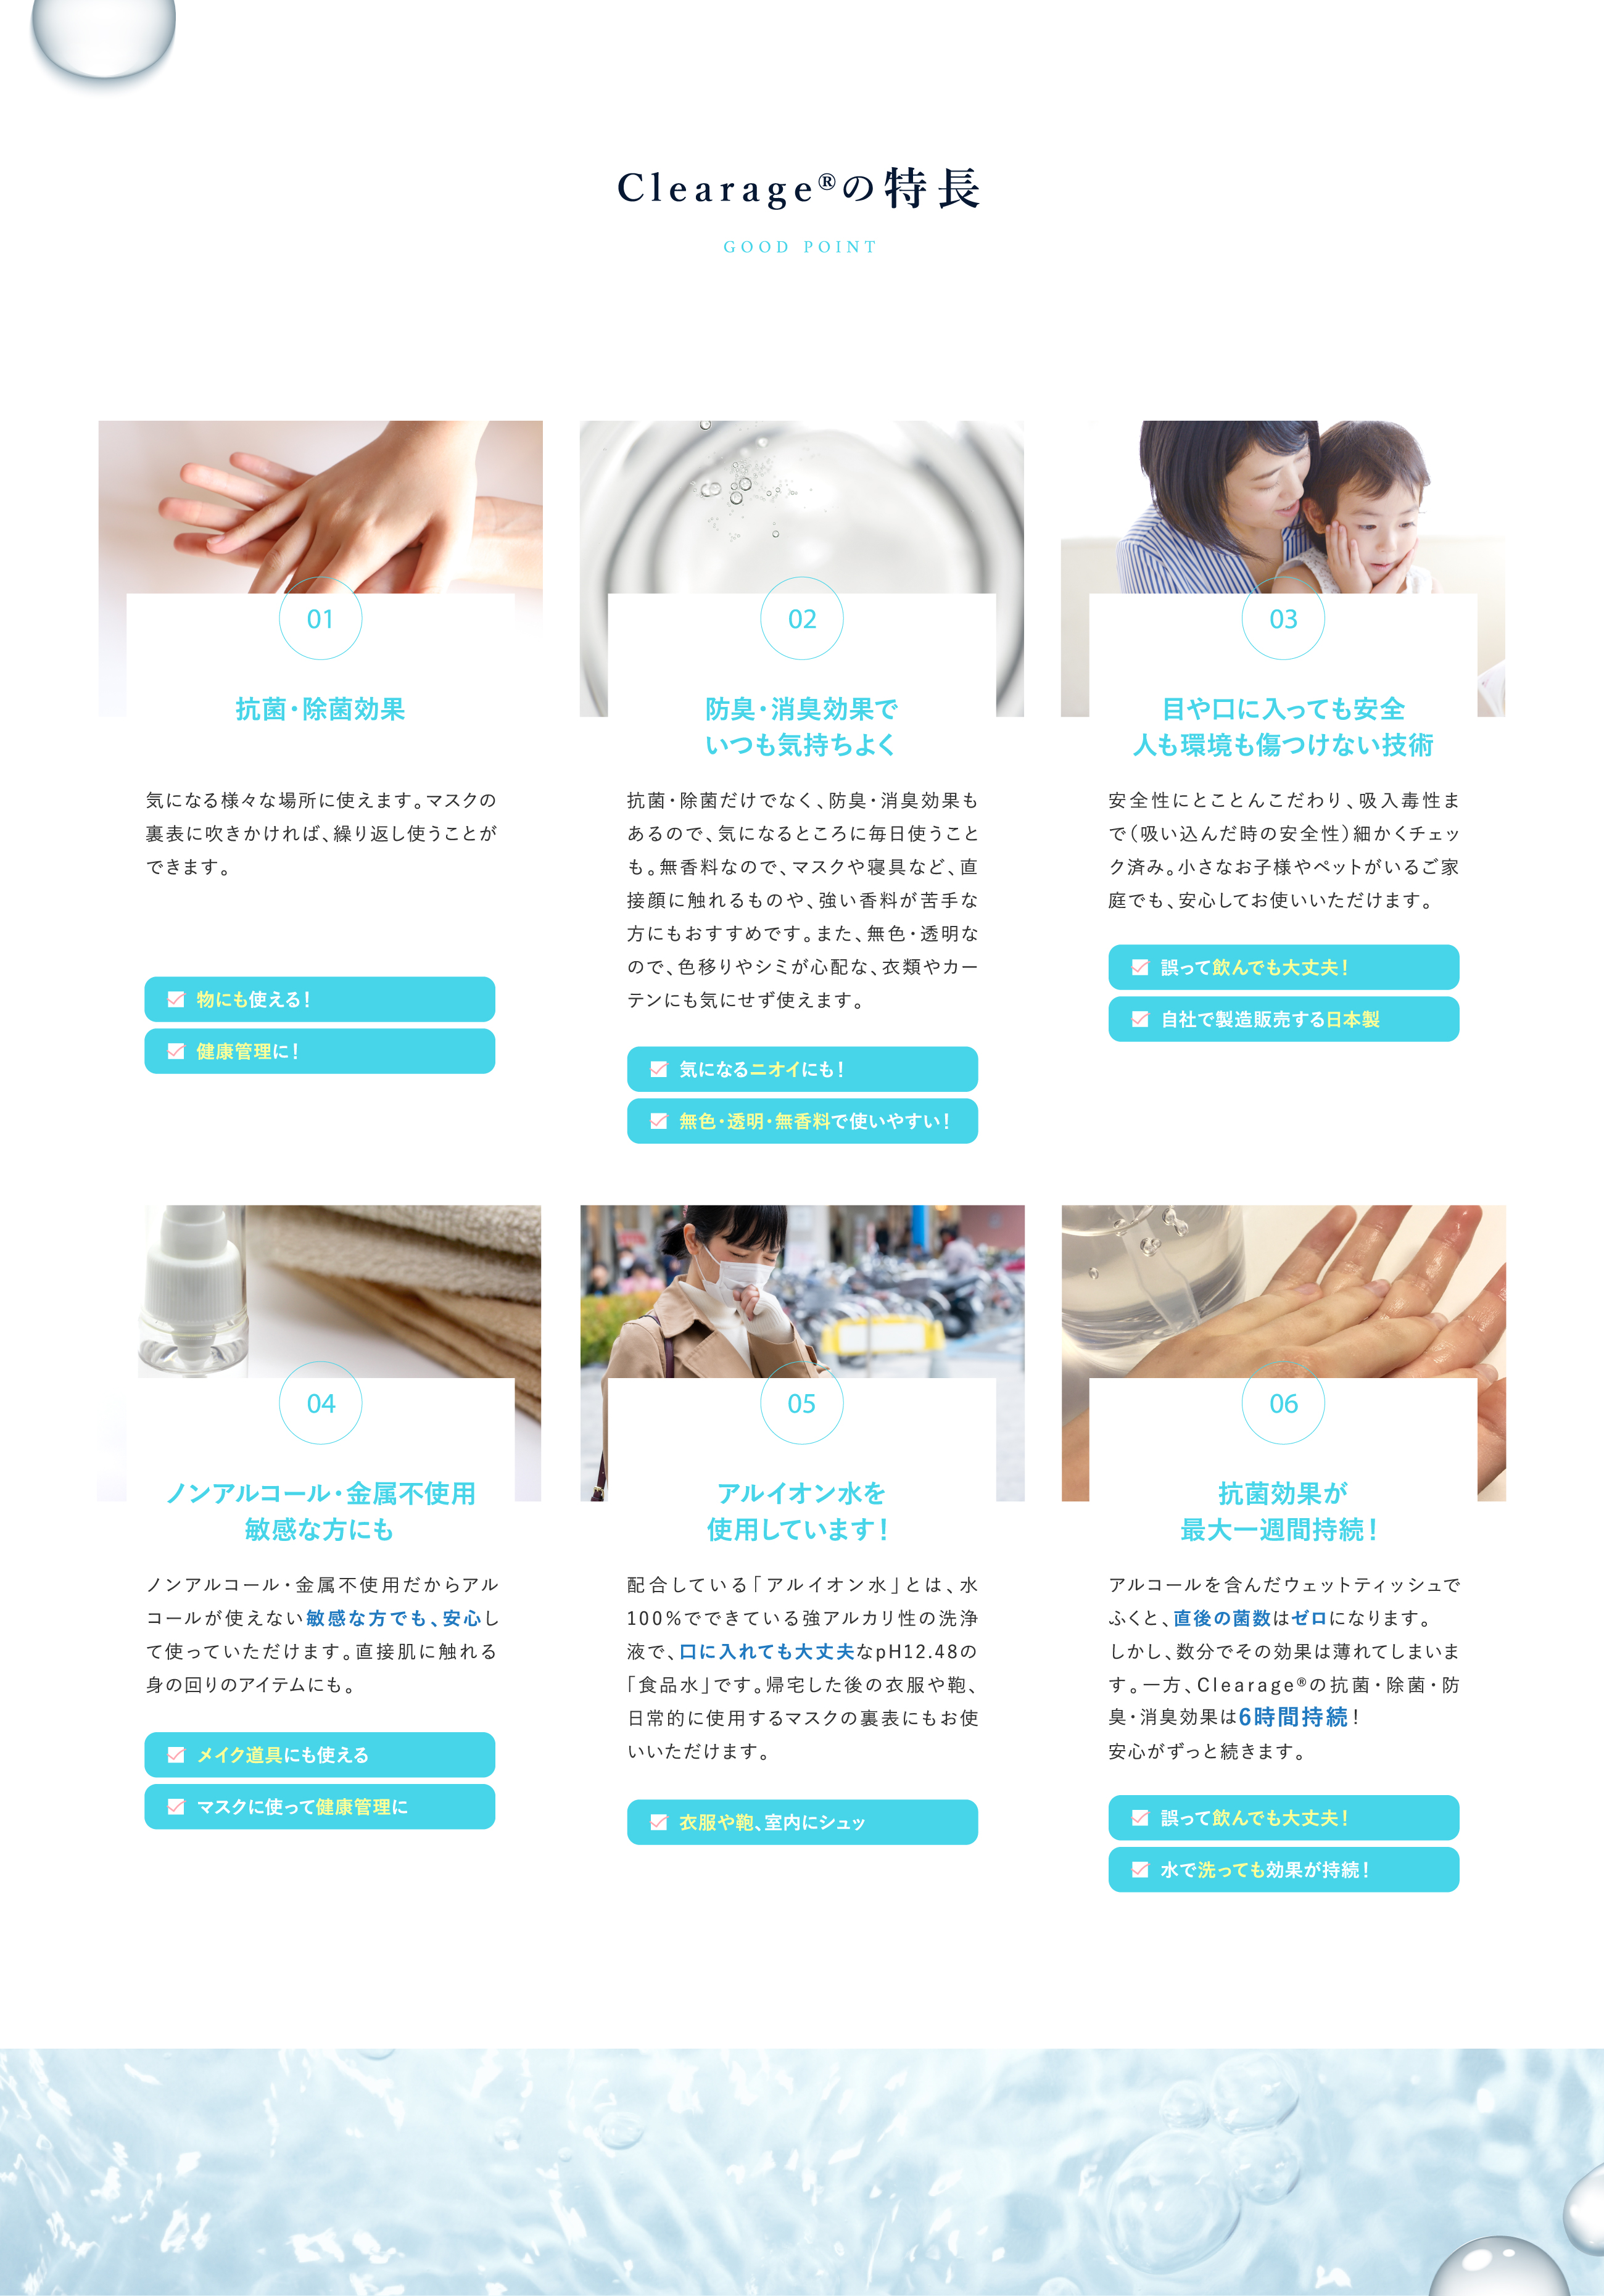 Clearage®の特長